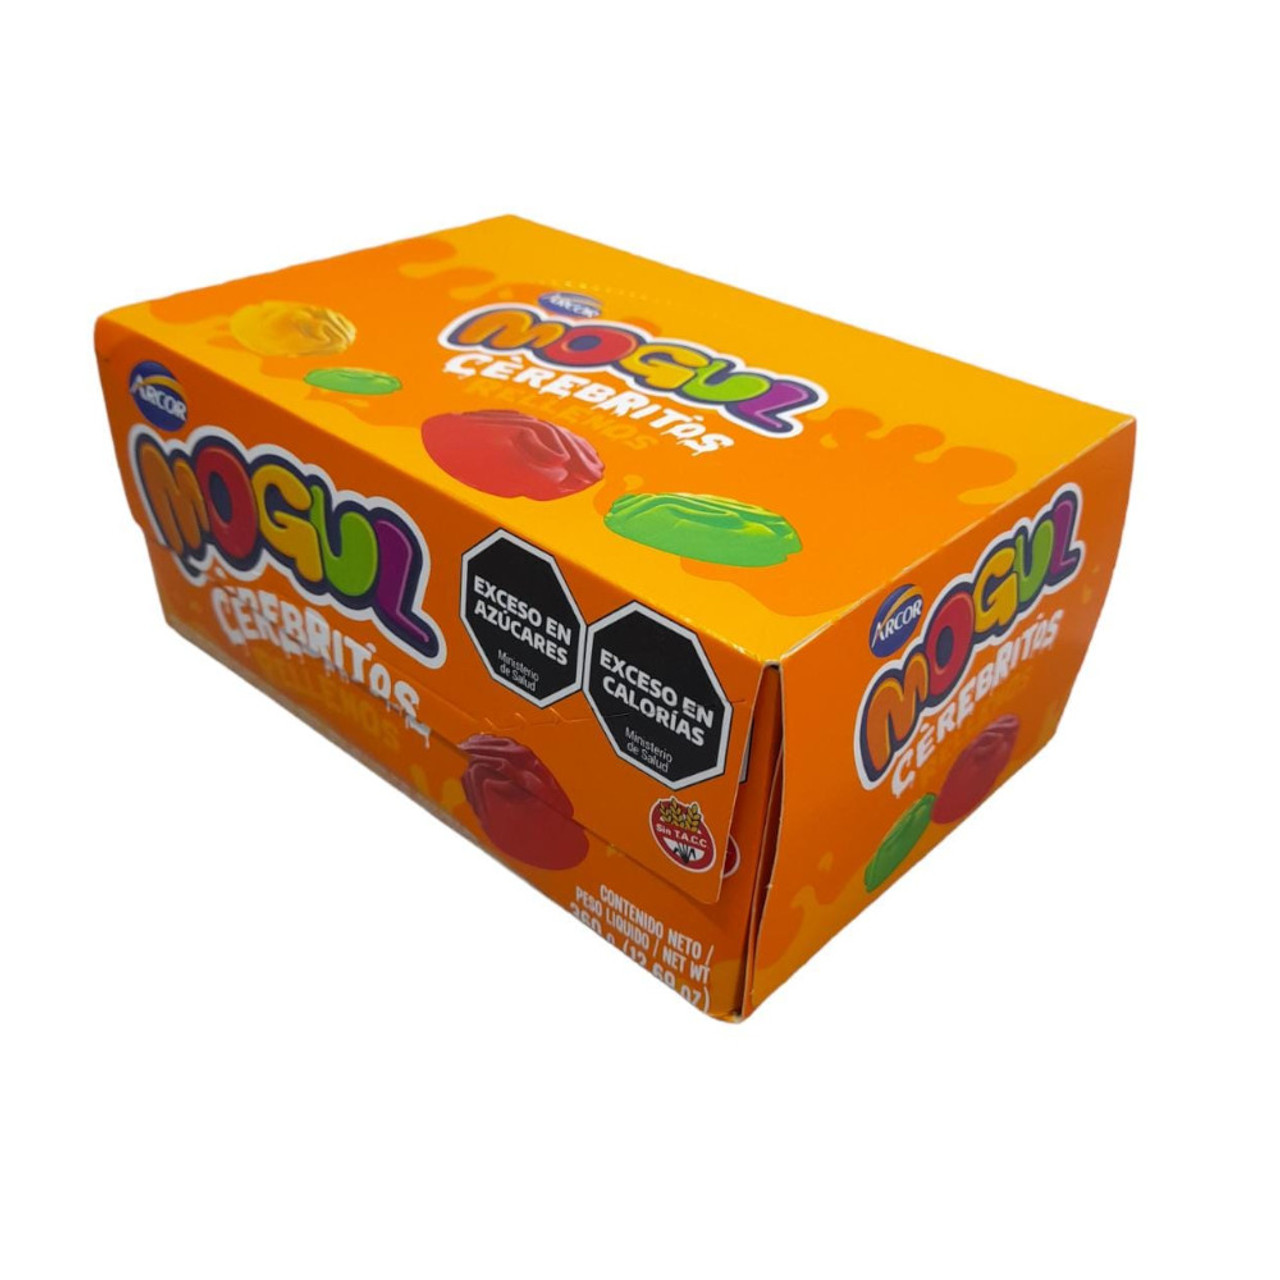 Mogul Cerebritos Rellenos Brain-Shaped Jelly Gums Filled with Fruit ...